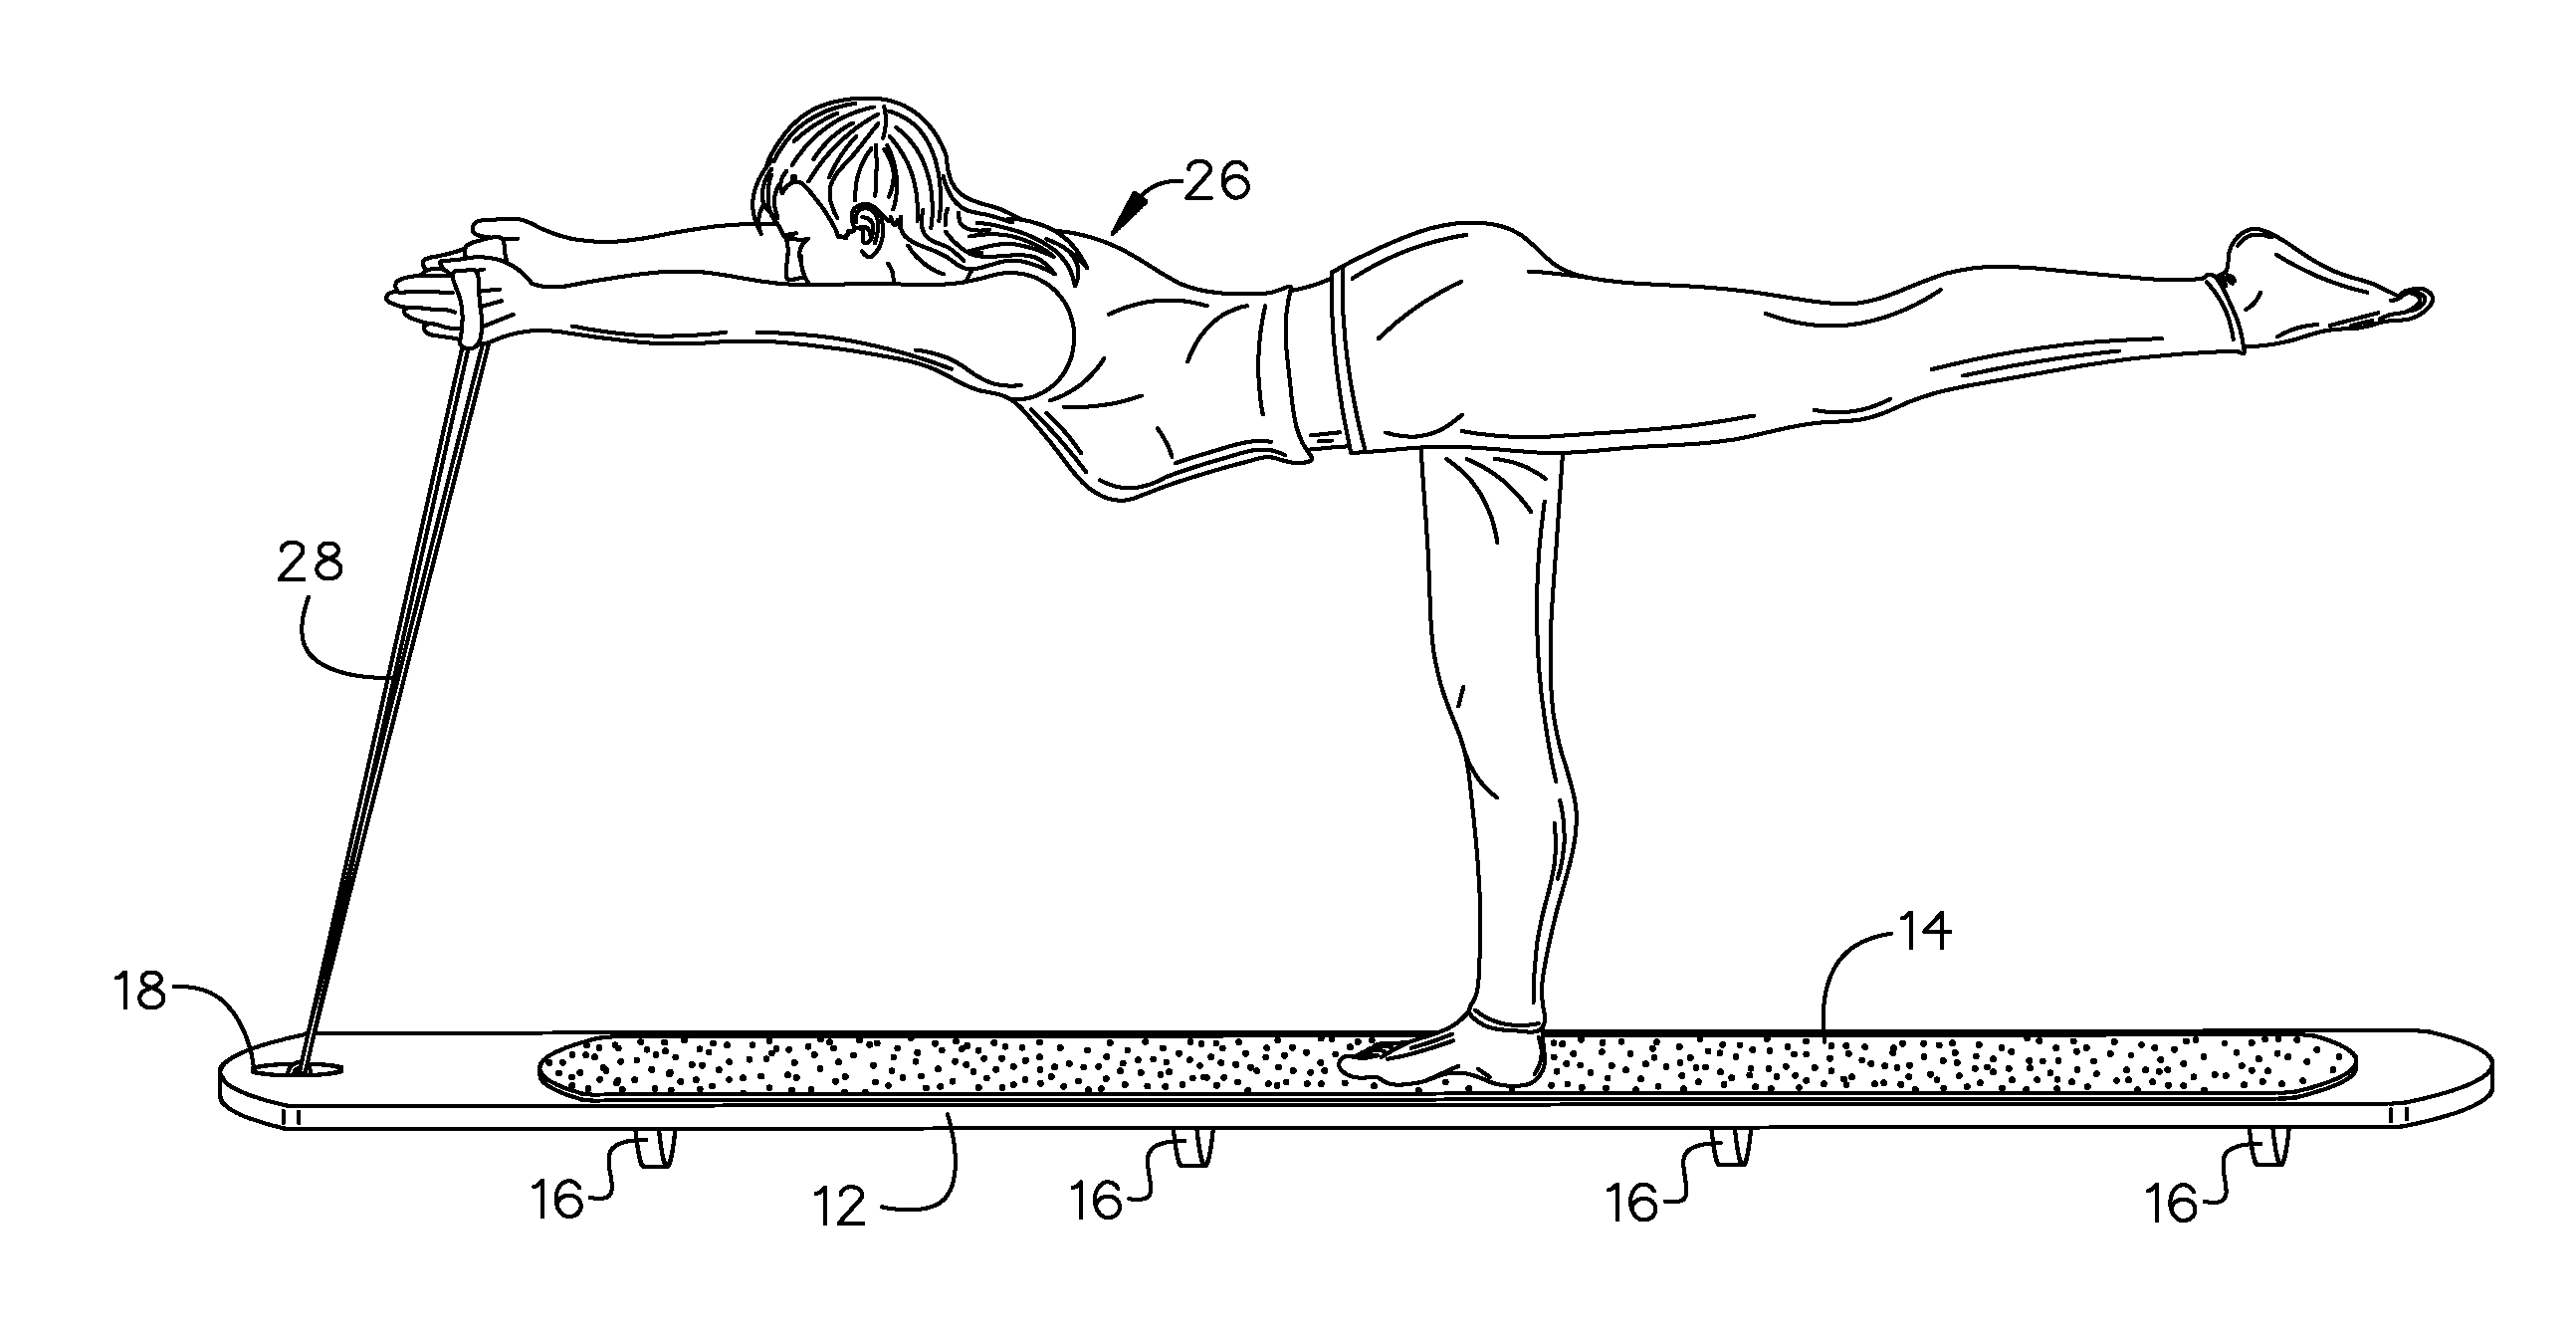 Excercise balancing board